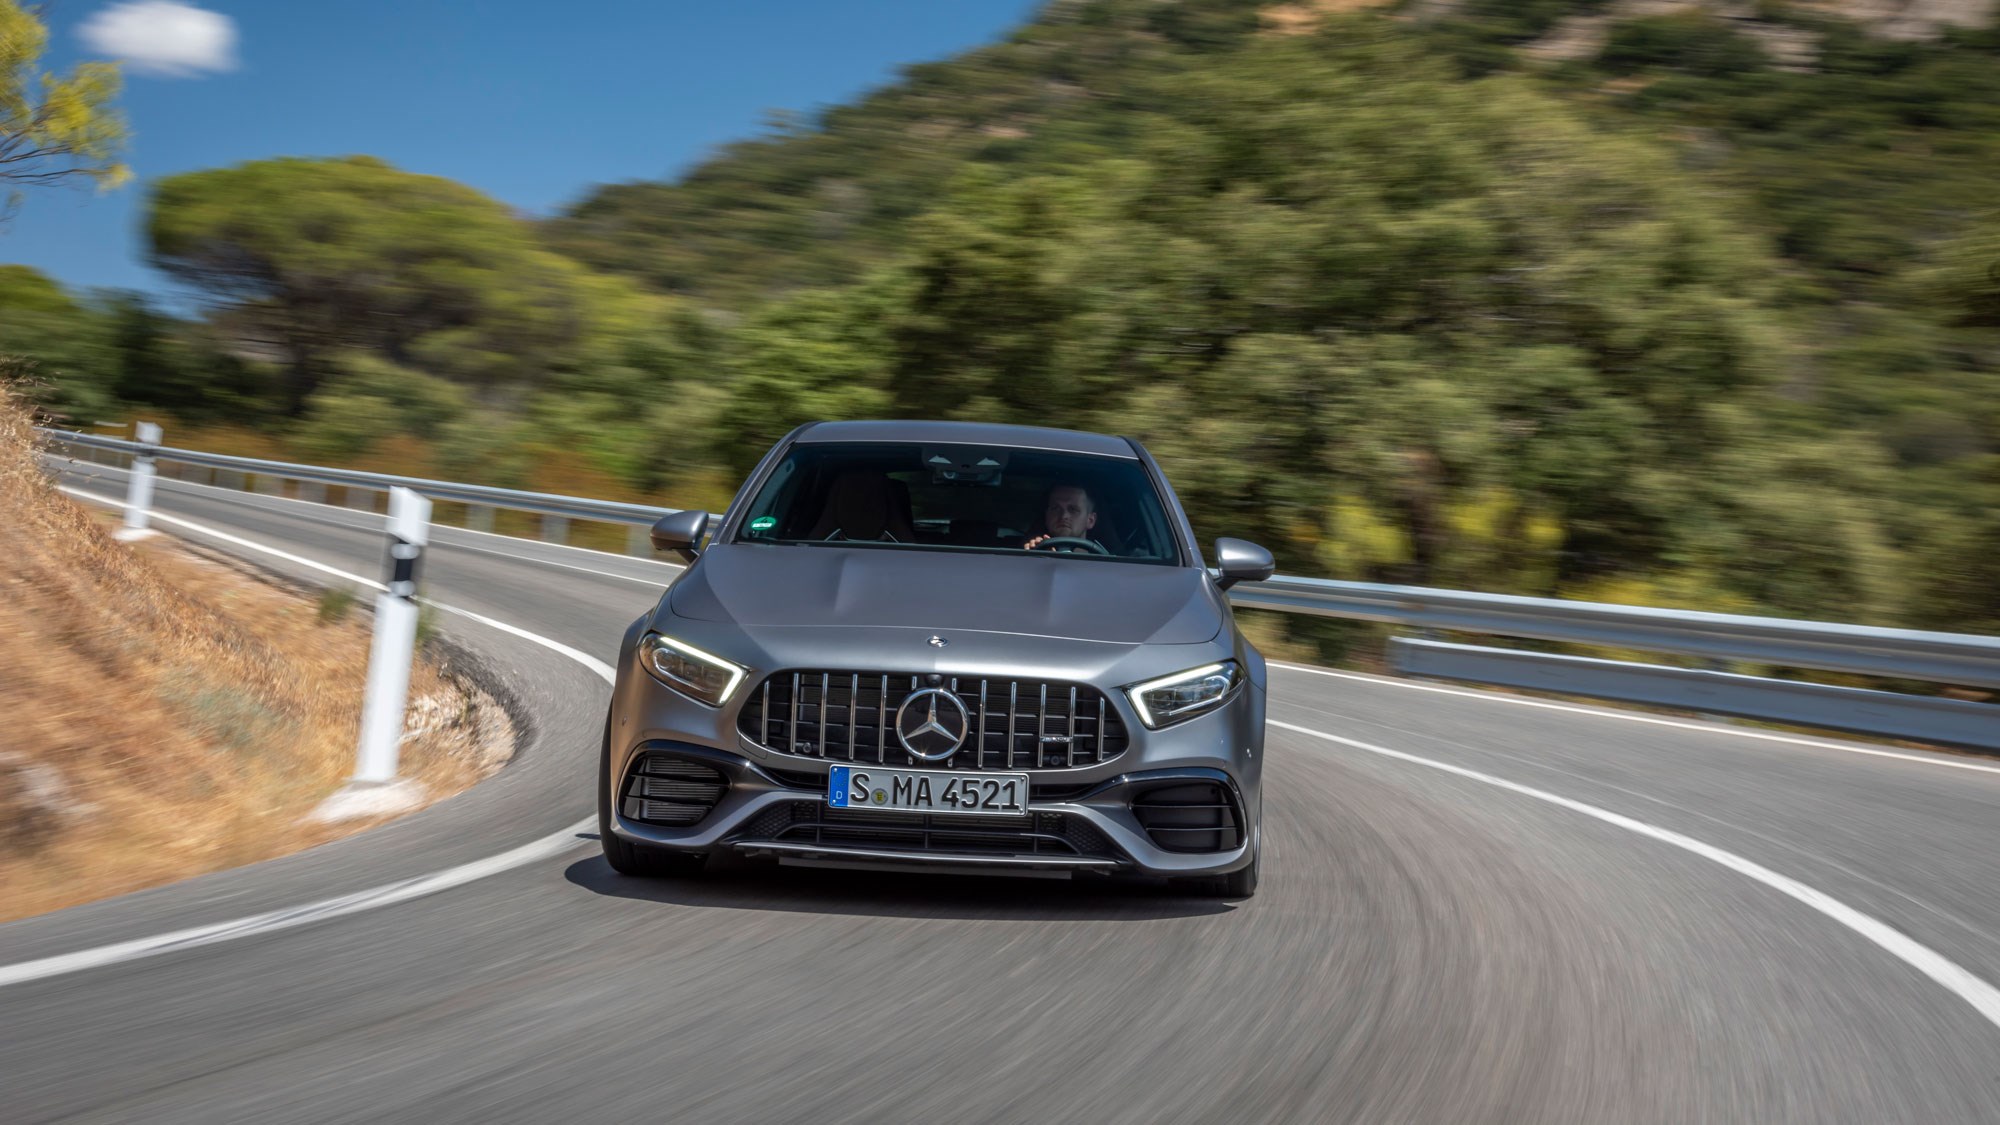 The A45 gets the AMG Panamerica grille